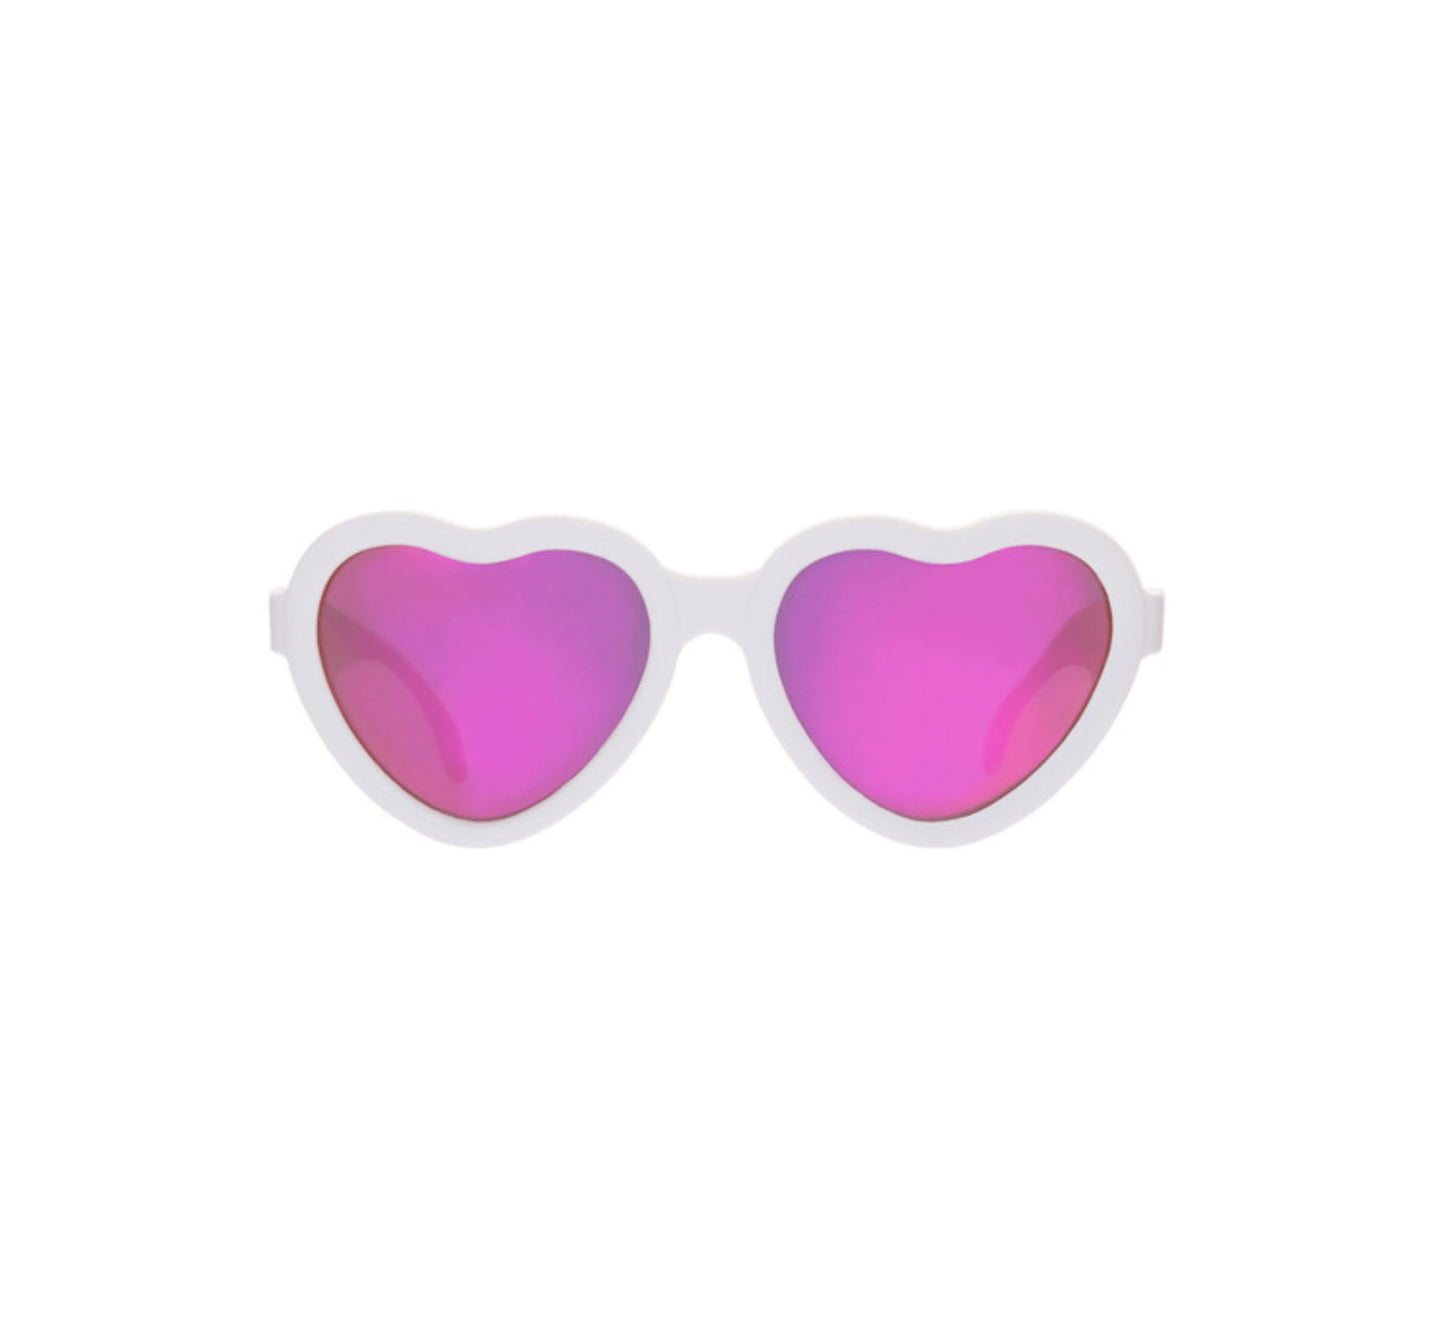 Sweethearts Polarized Lenses - White and Pink